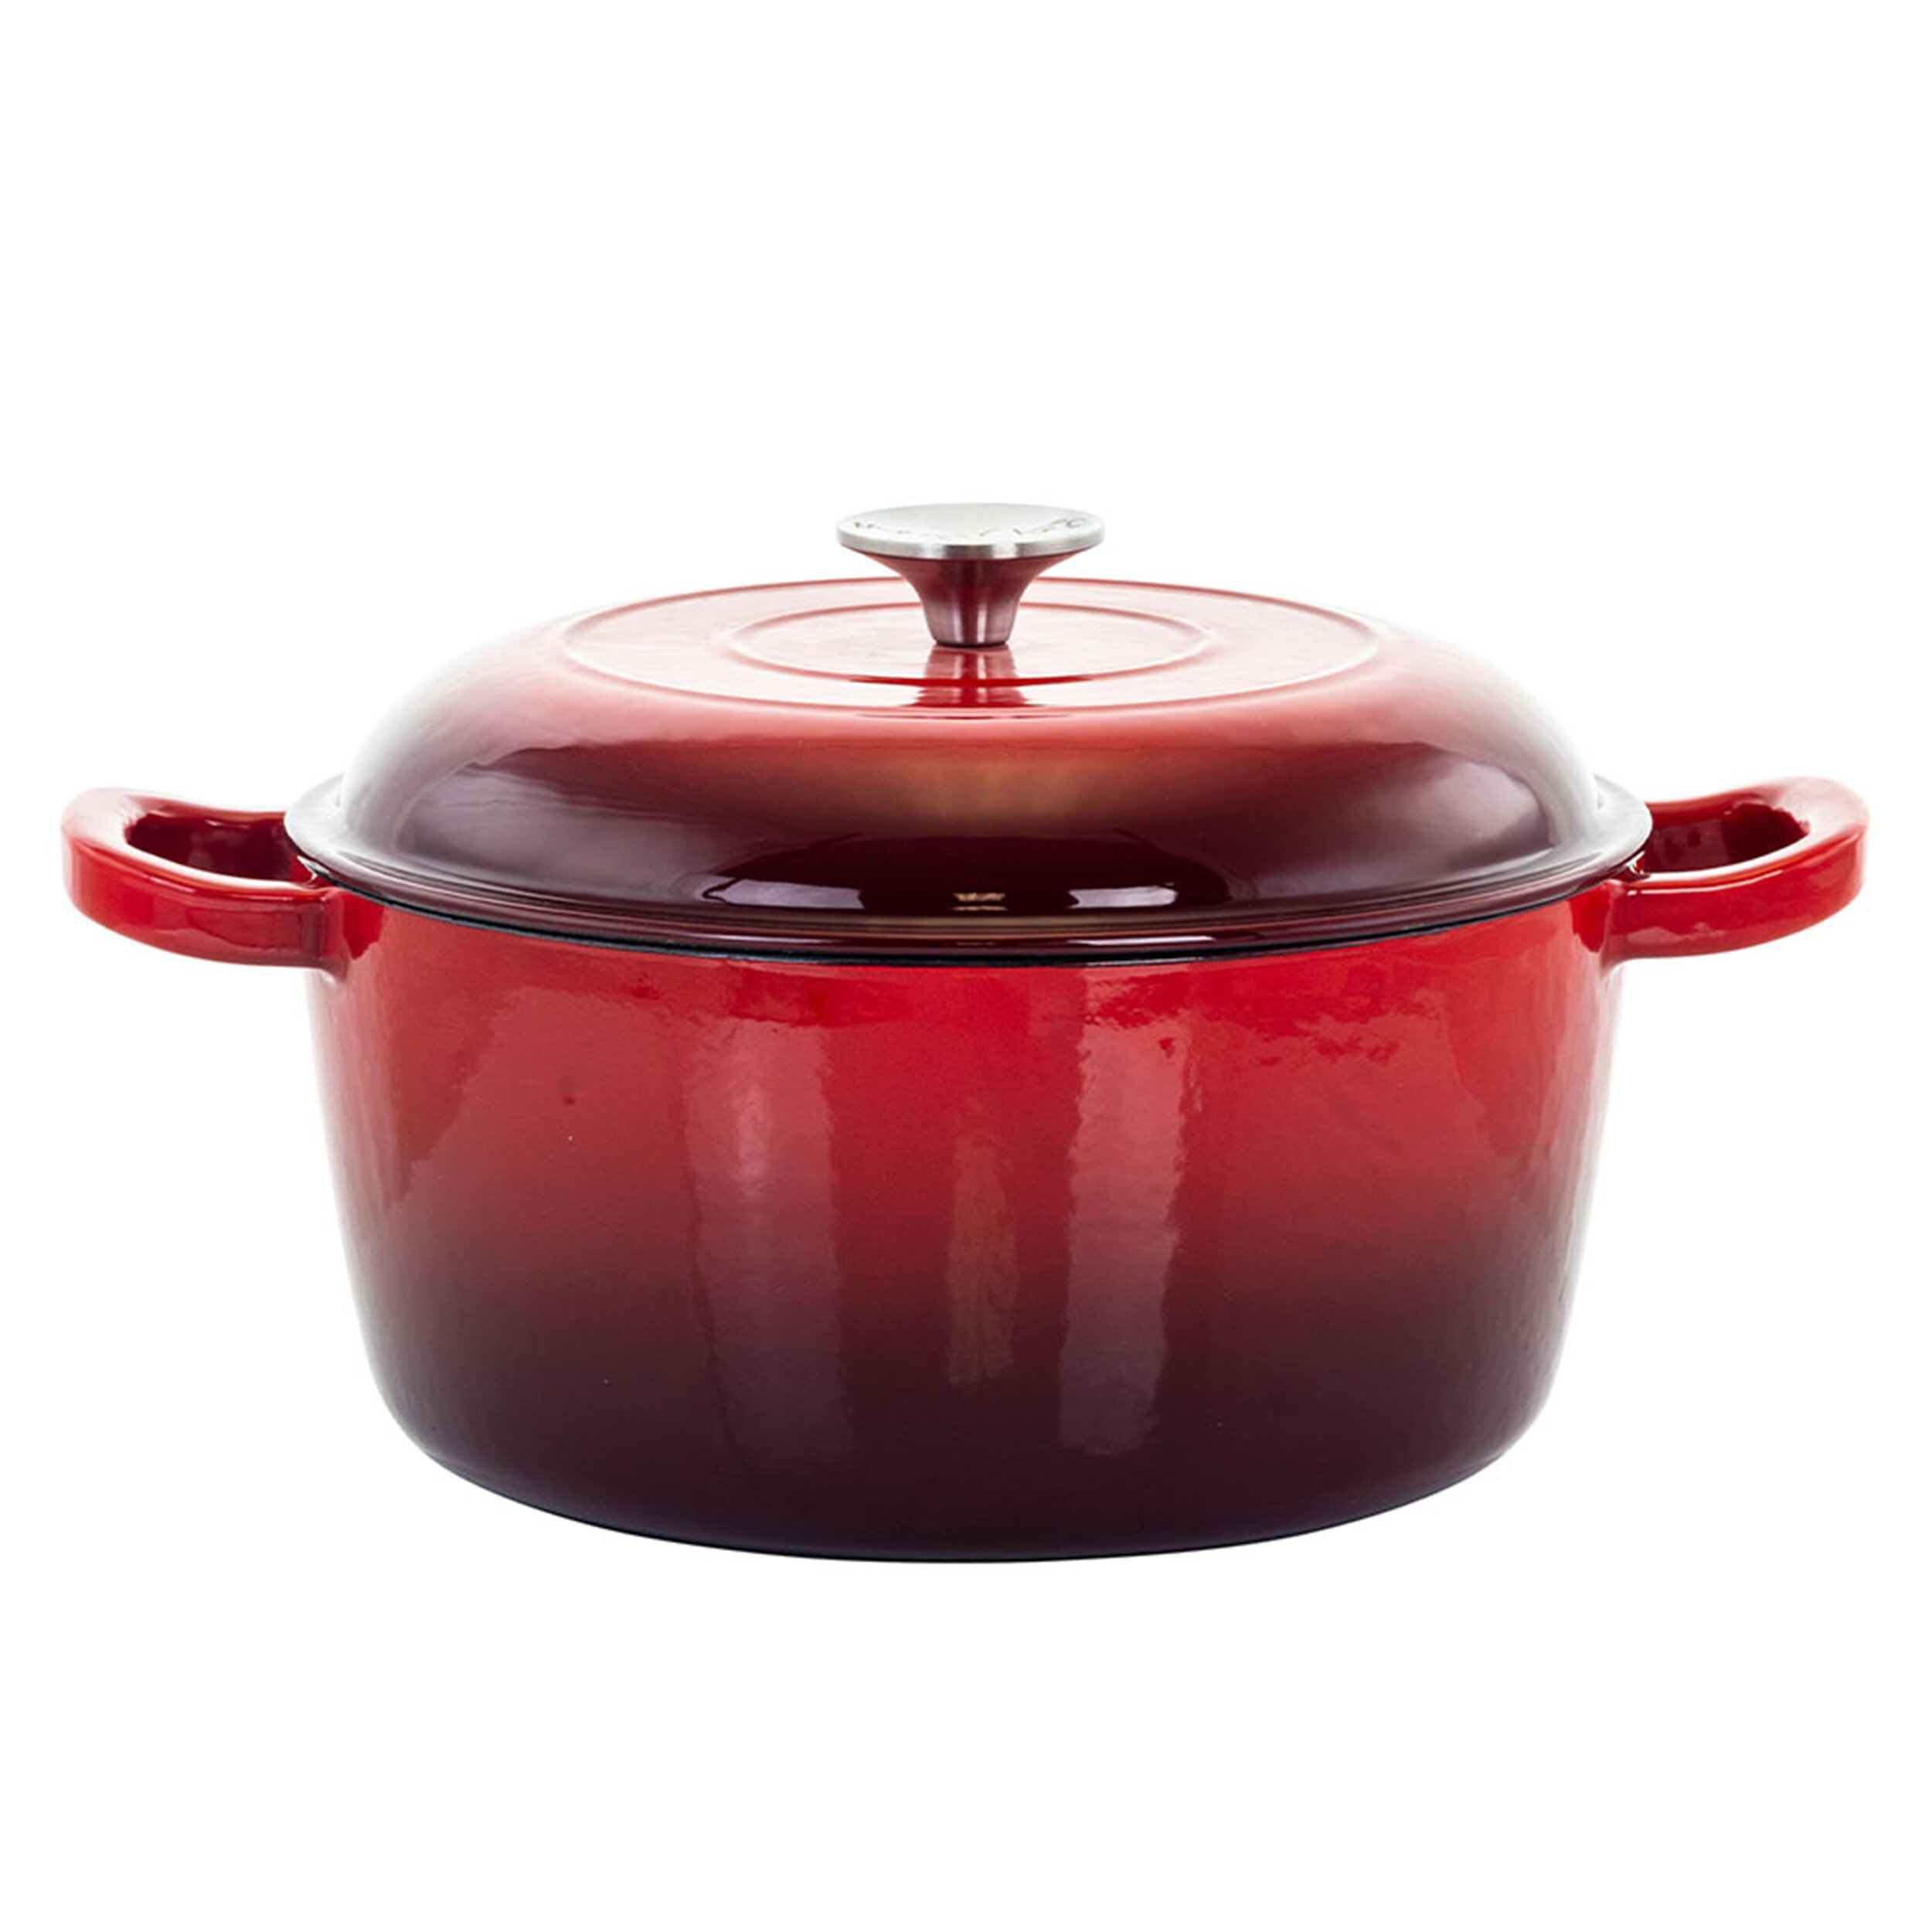 Cuisinart Chef’s Classic Enameled Cast Iron Round Dutch Oven